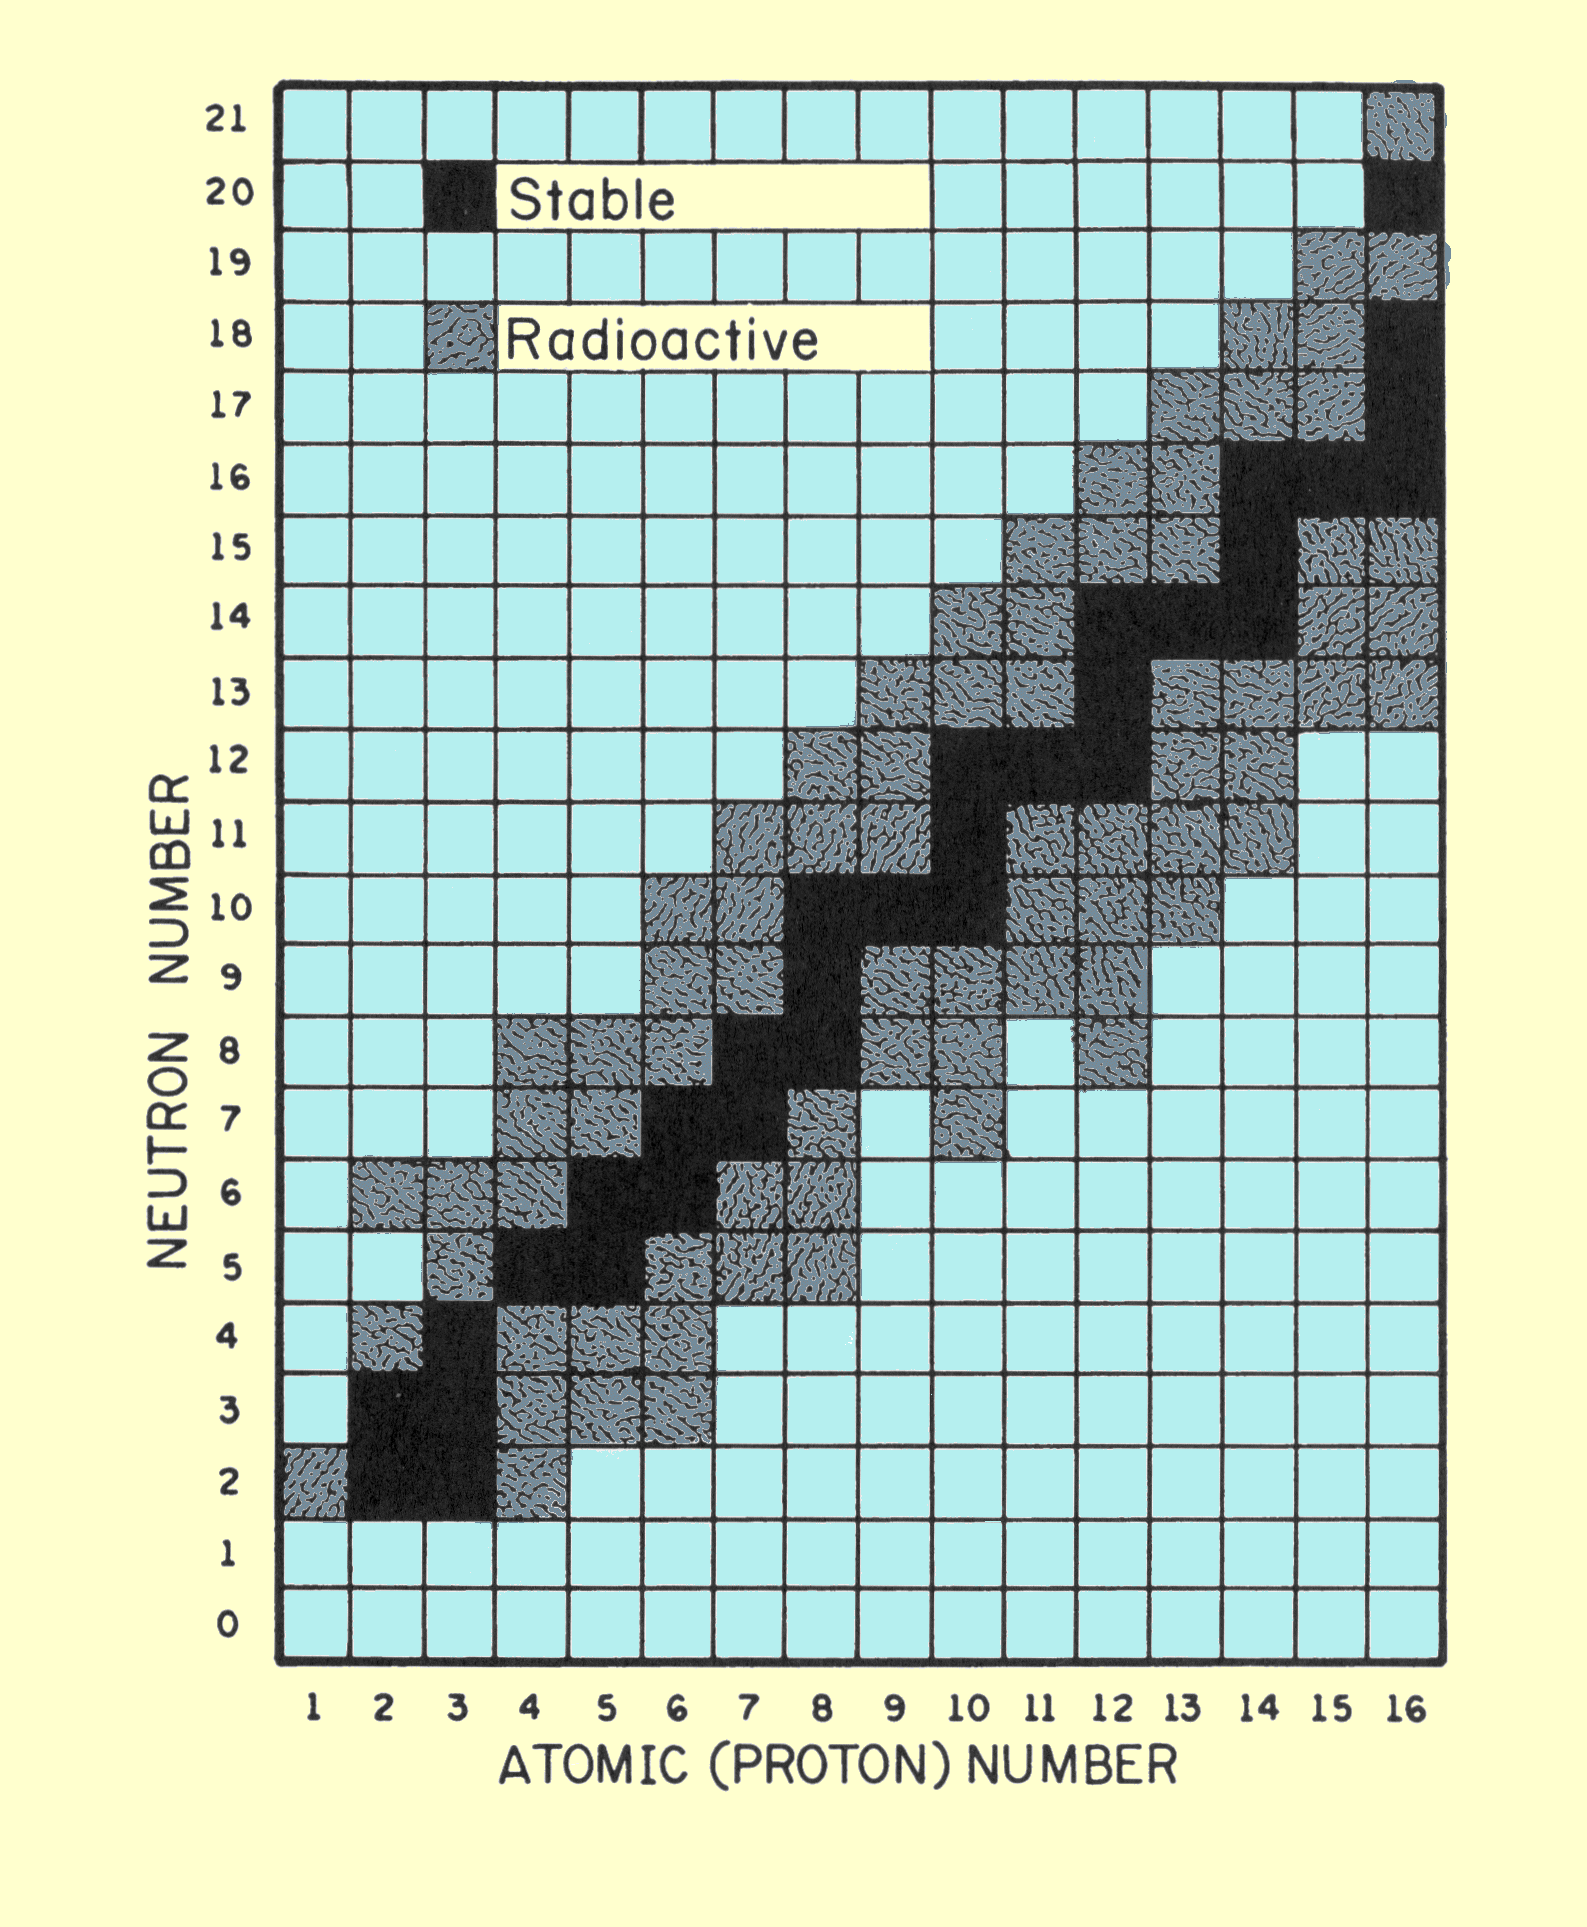 Nuclide Chart Showing the Relationship of Unstable Radioactive and Stable Nuclear Structures